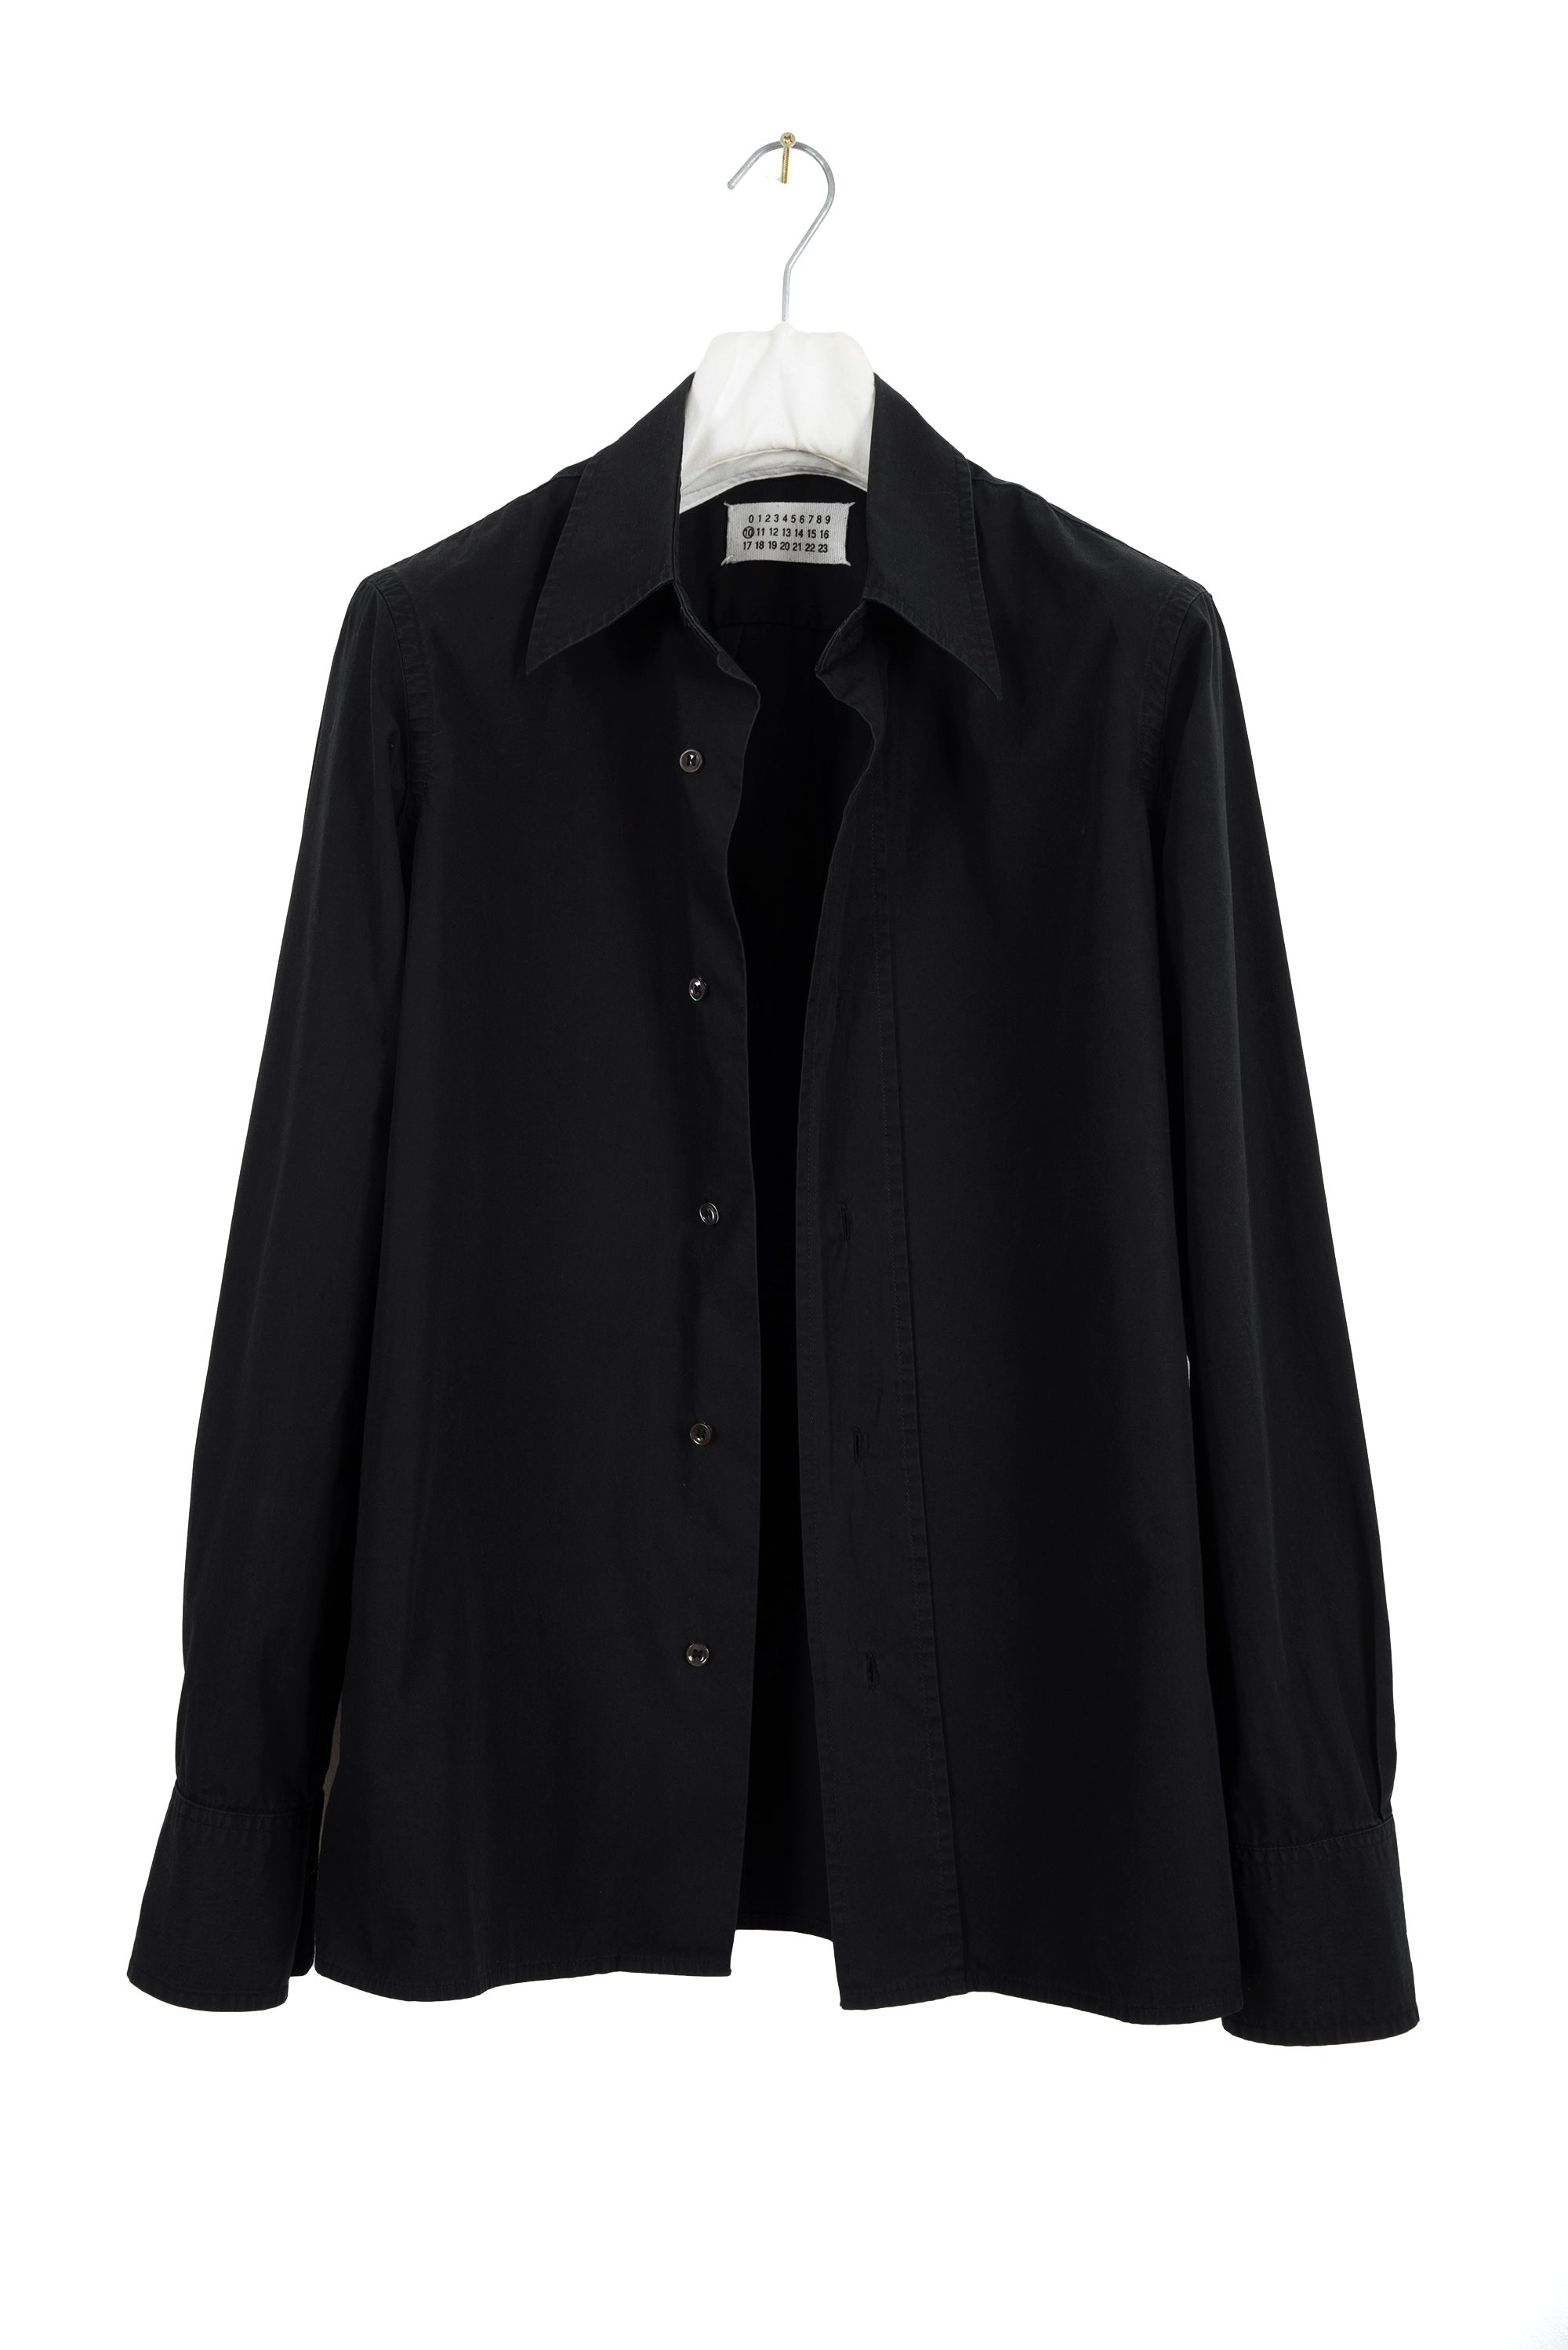 2002 A/W BLACK COTTON SHIRT WITH WIDE FRONT PLACKET